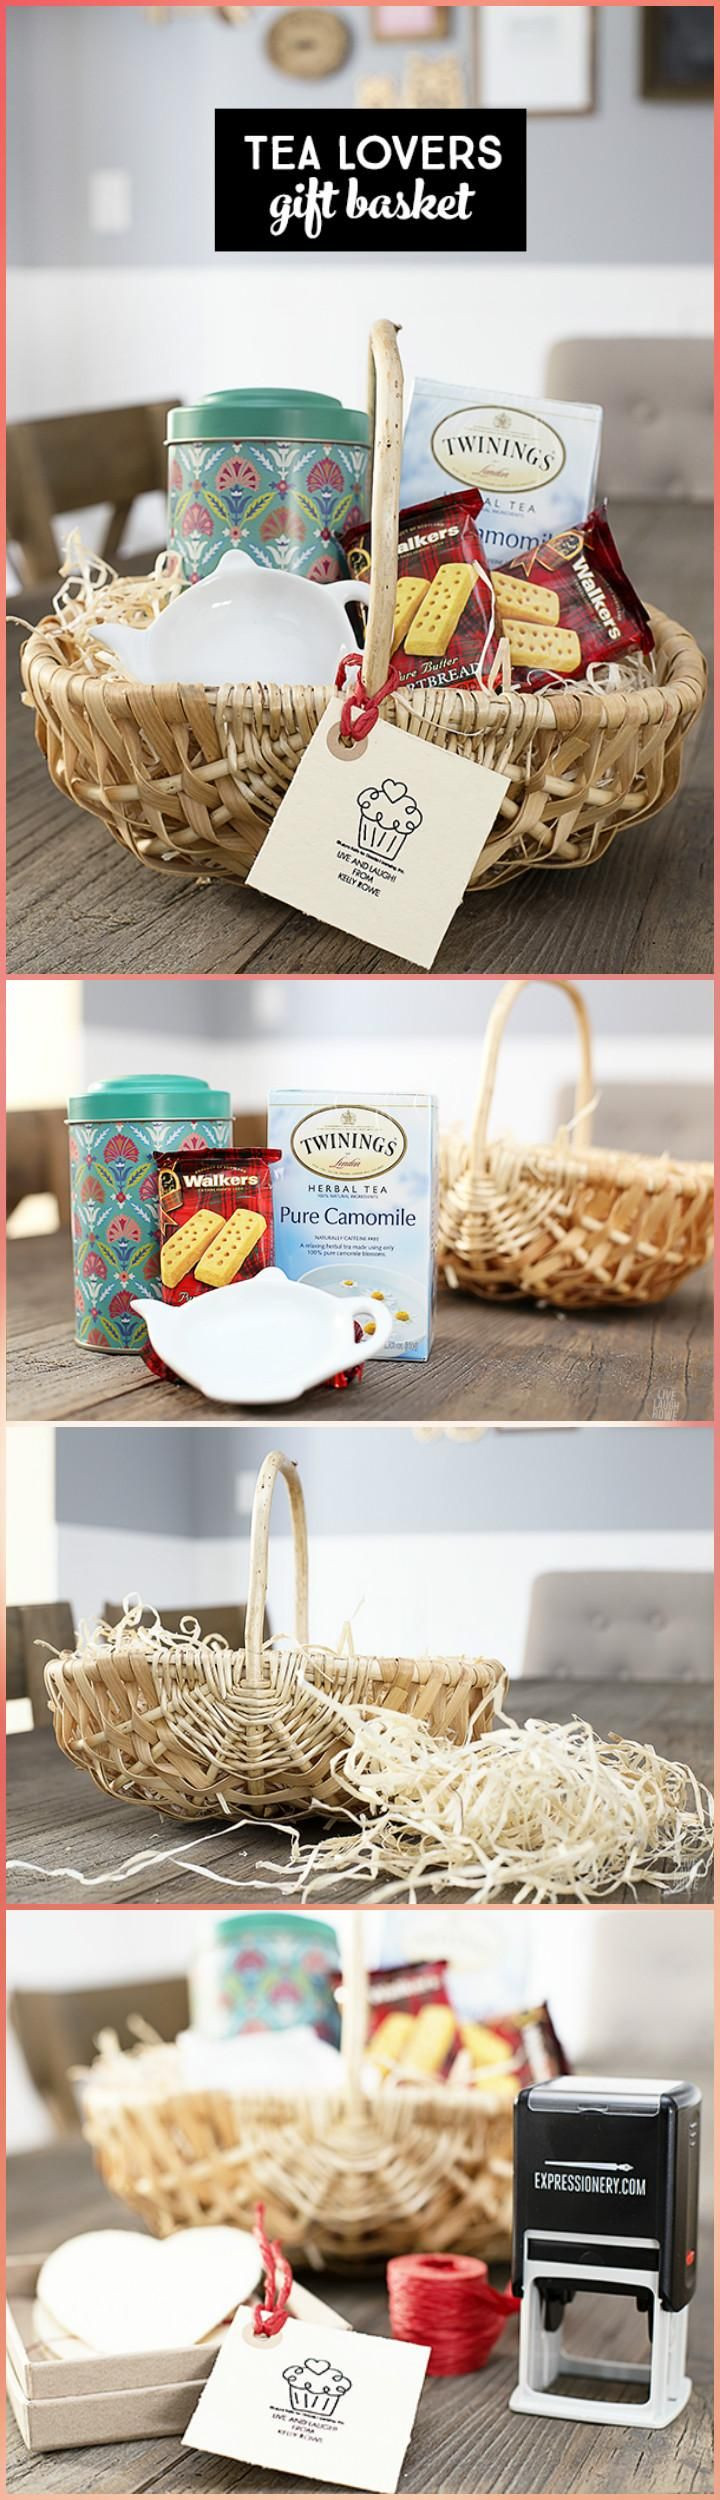 Inexpensive Gift Baskets Ideas
 70 Inexpensive DIY Gift Basket Ideas DIY Gifts Page